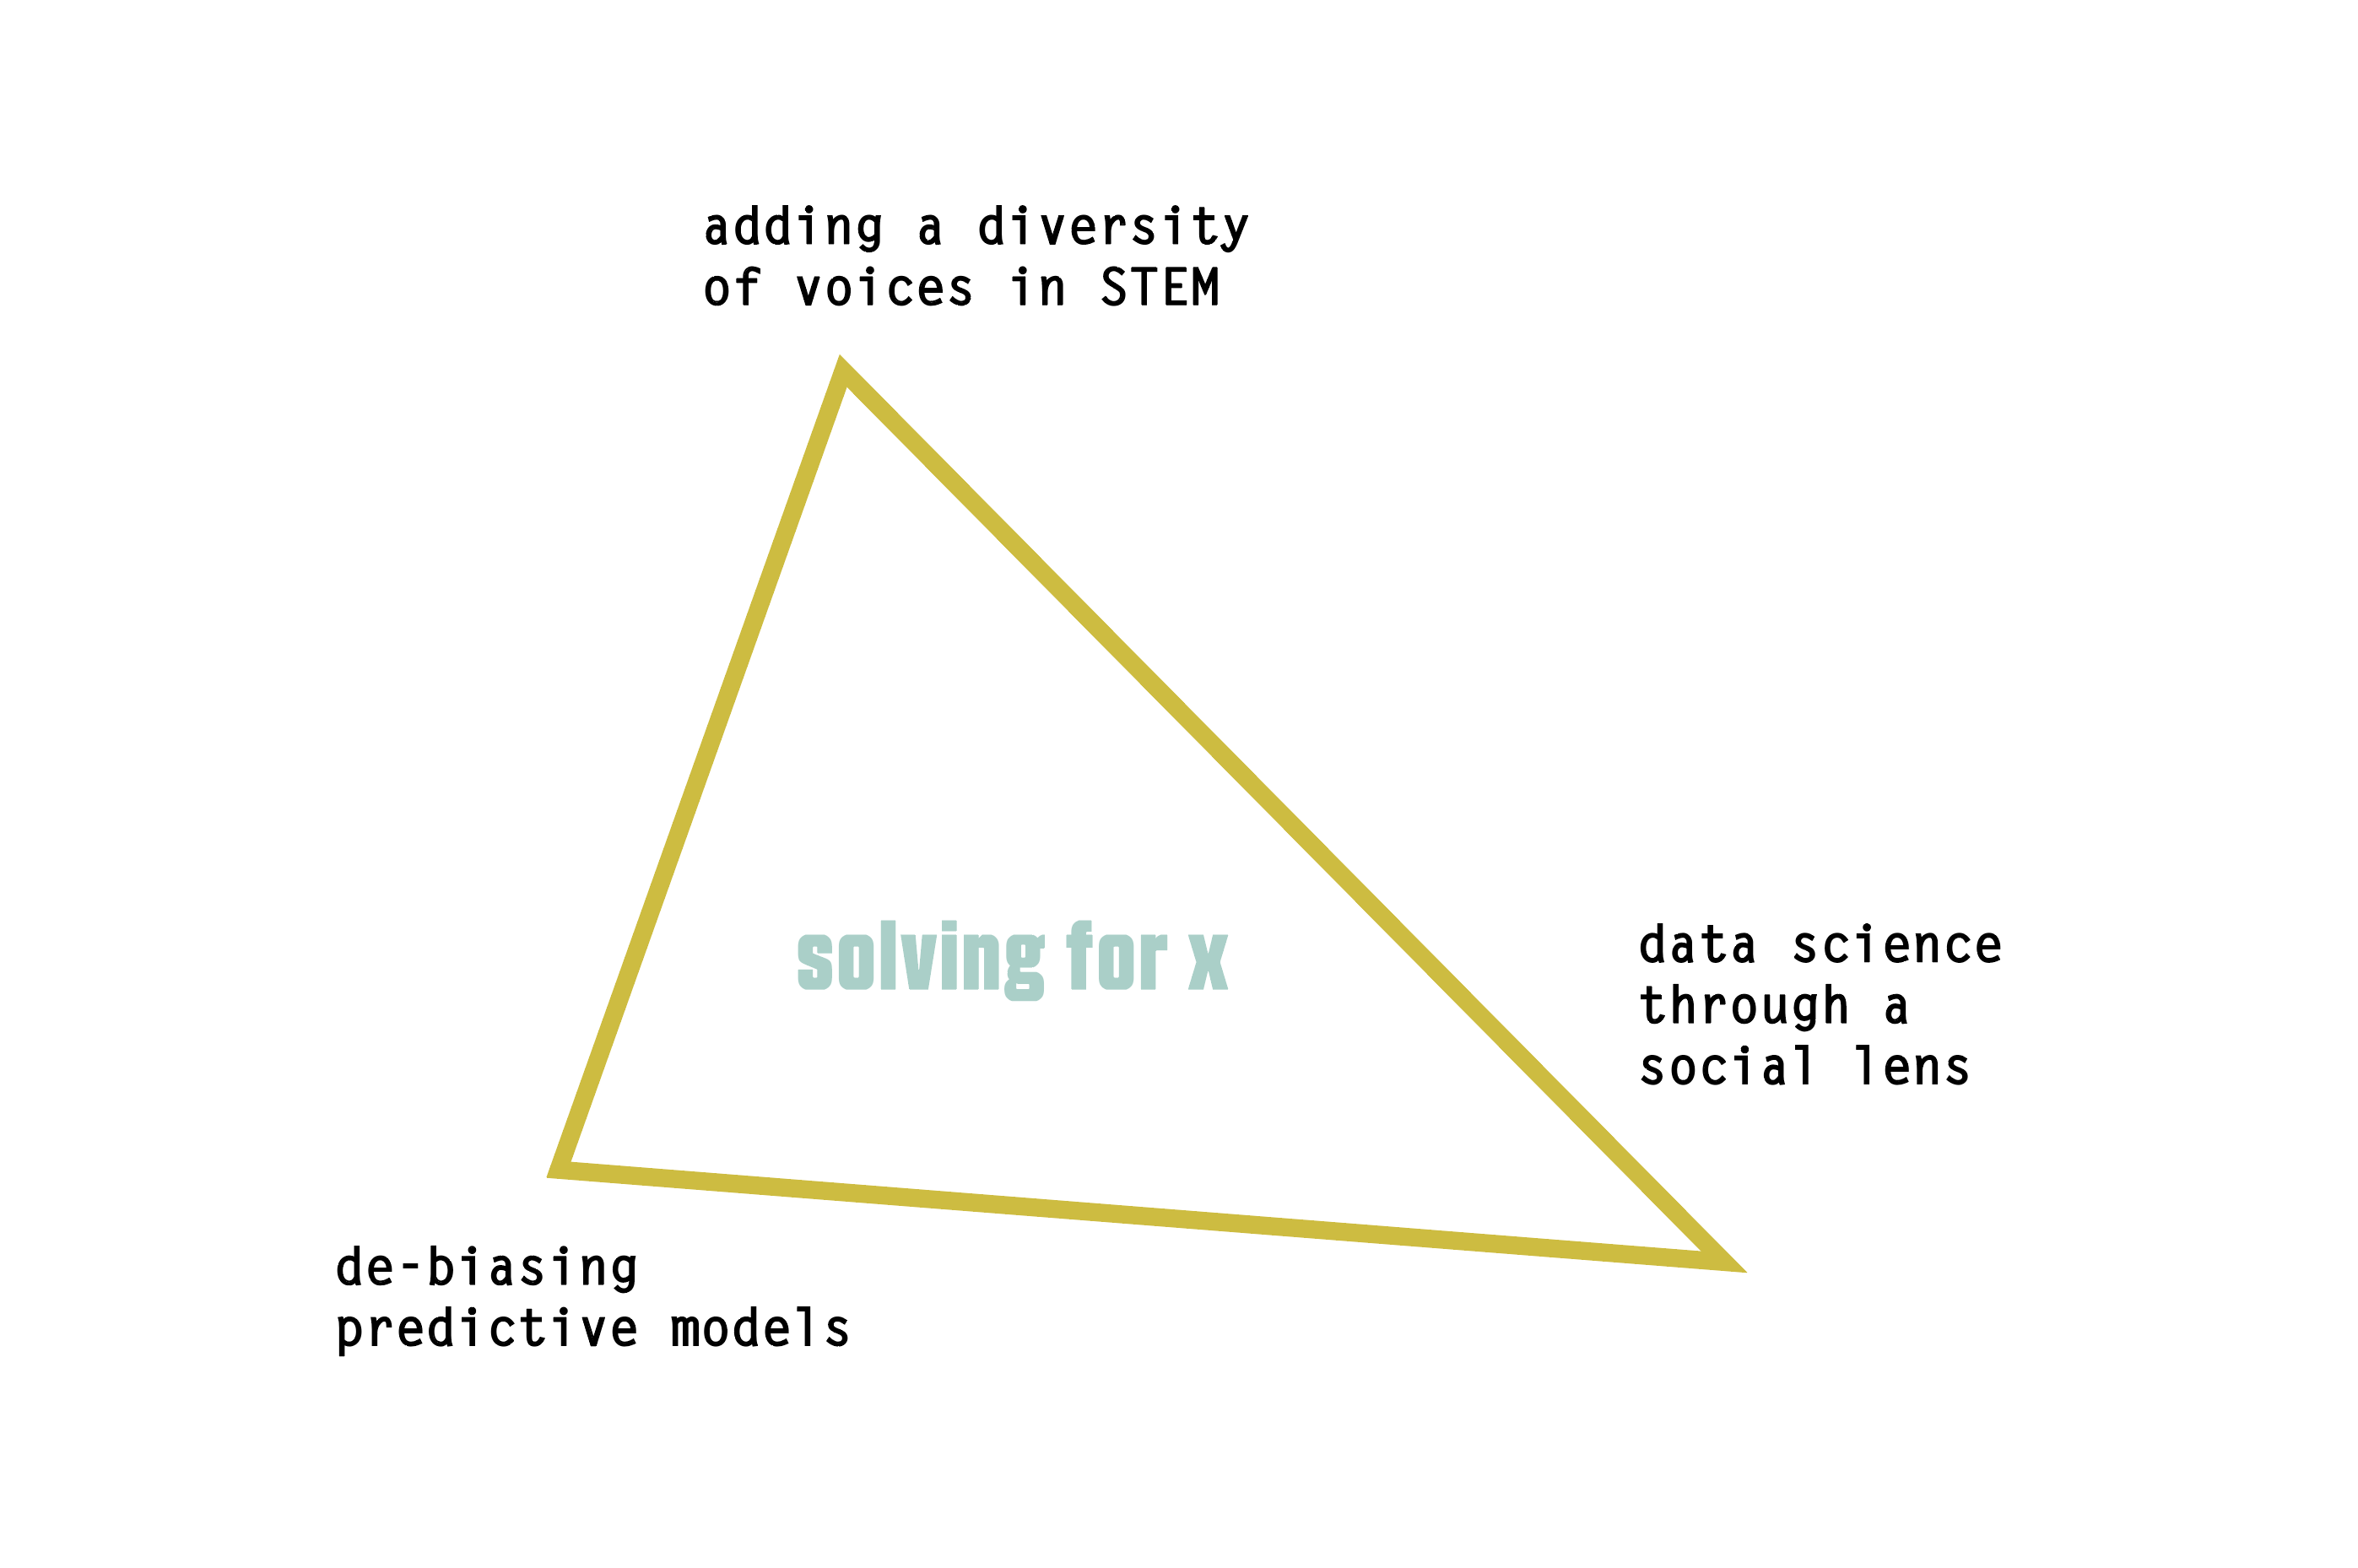 diagram where one tries to solve for X that includes variables such as: Di-biasing predictive models, adding a diversity of voices in STEM, and Data science through a social lens